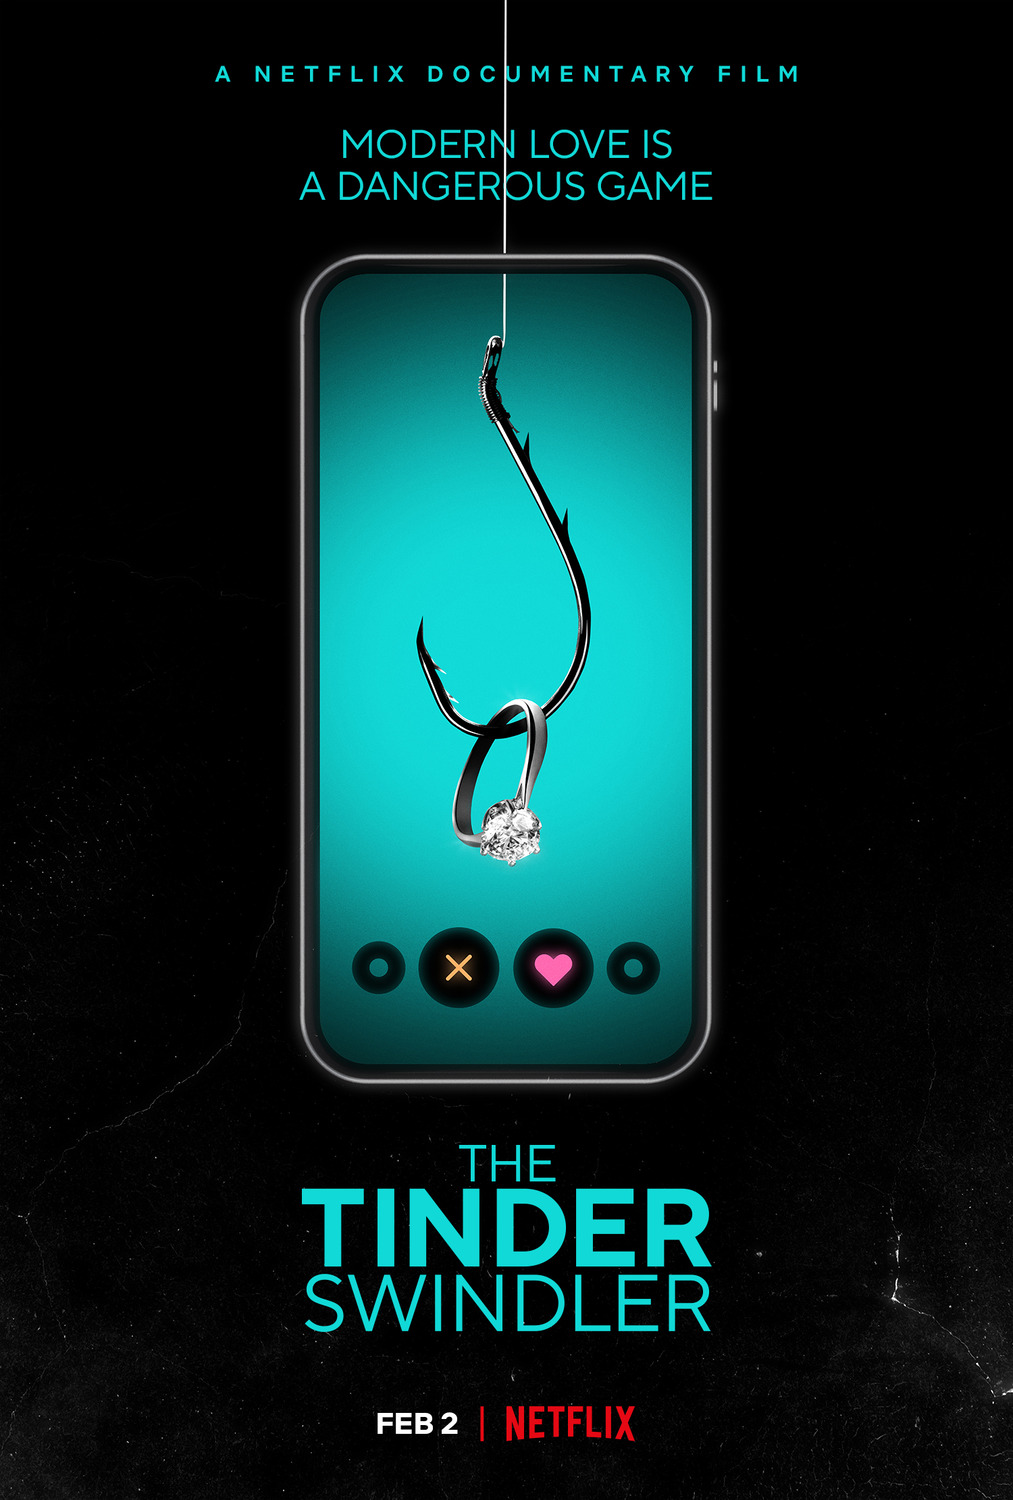 Is The Documentary The Tinder Swindler Available On Netflix